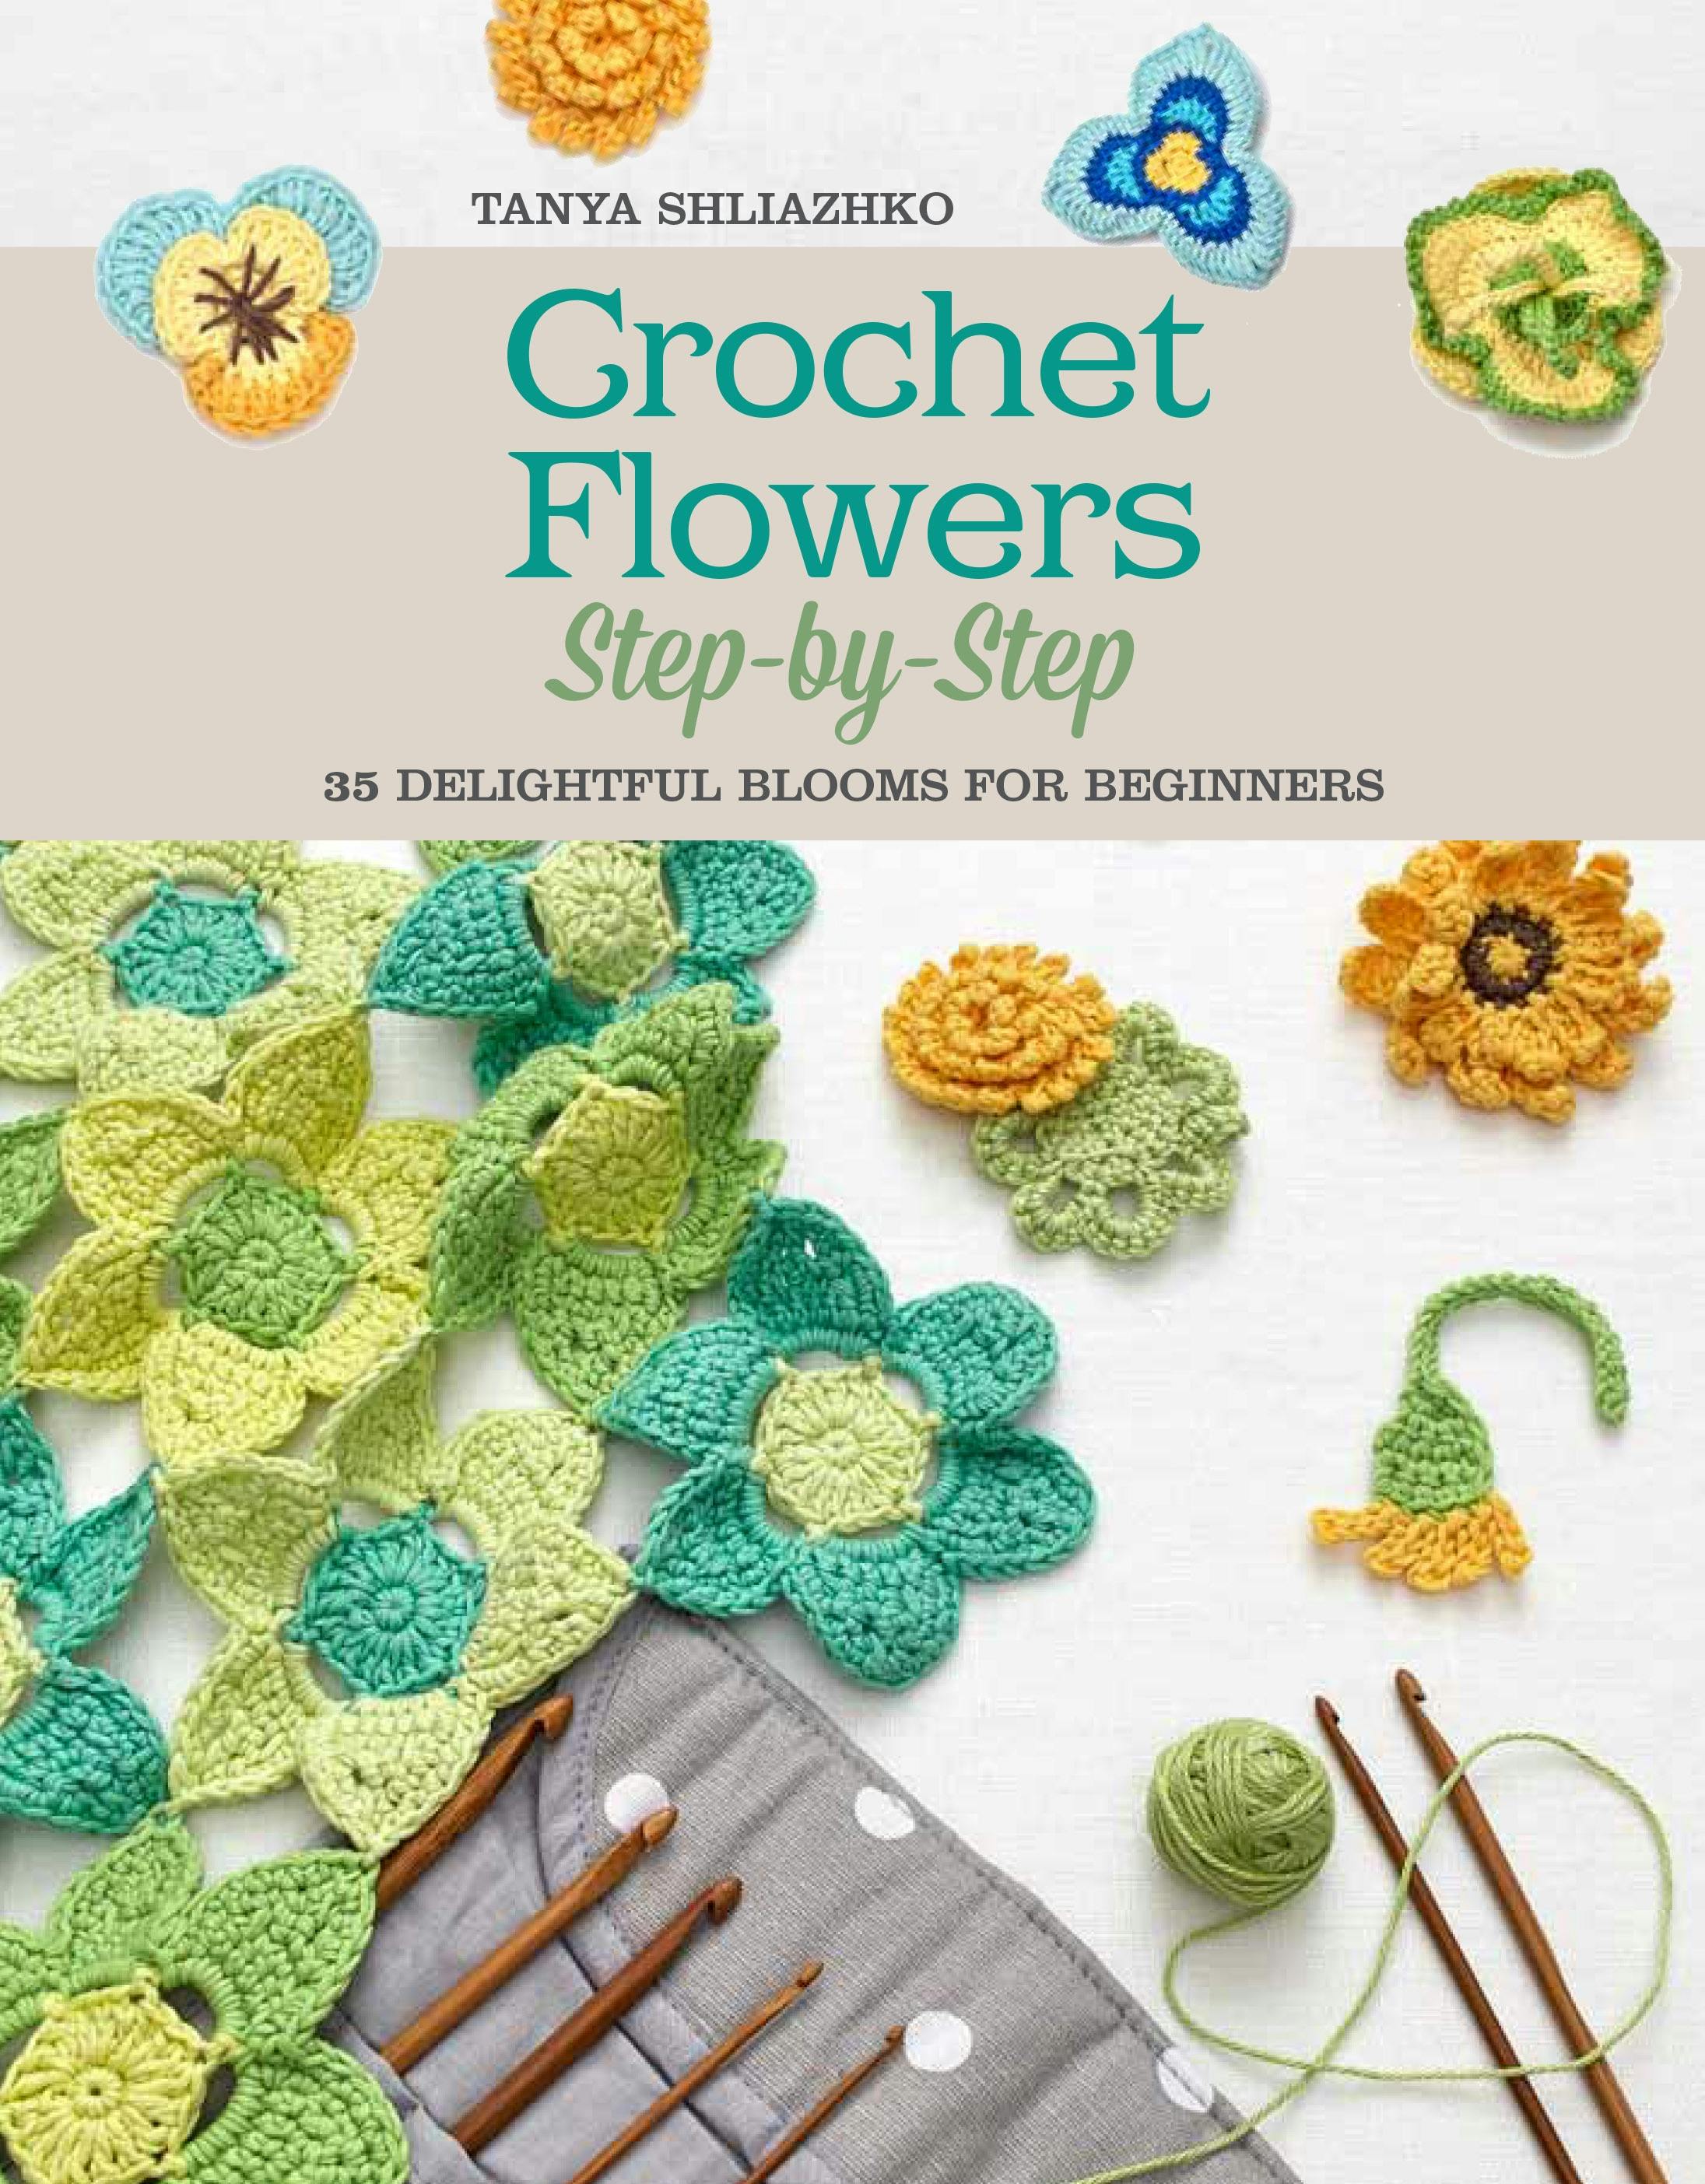 Image of Crochet Flowers Step-by-Step